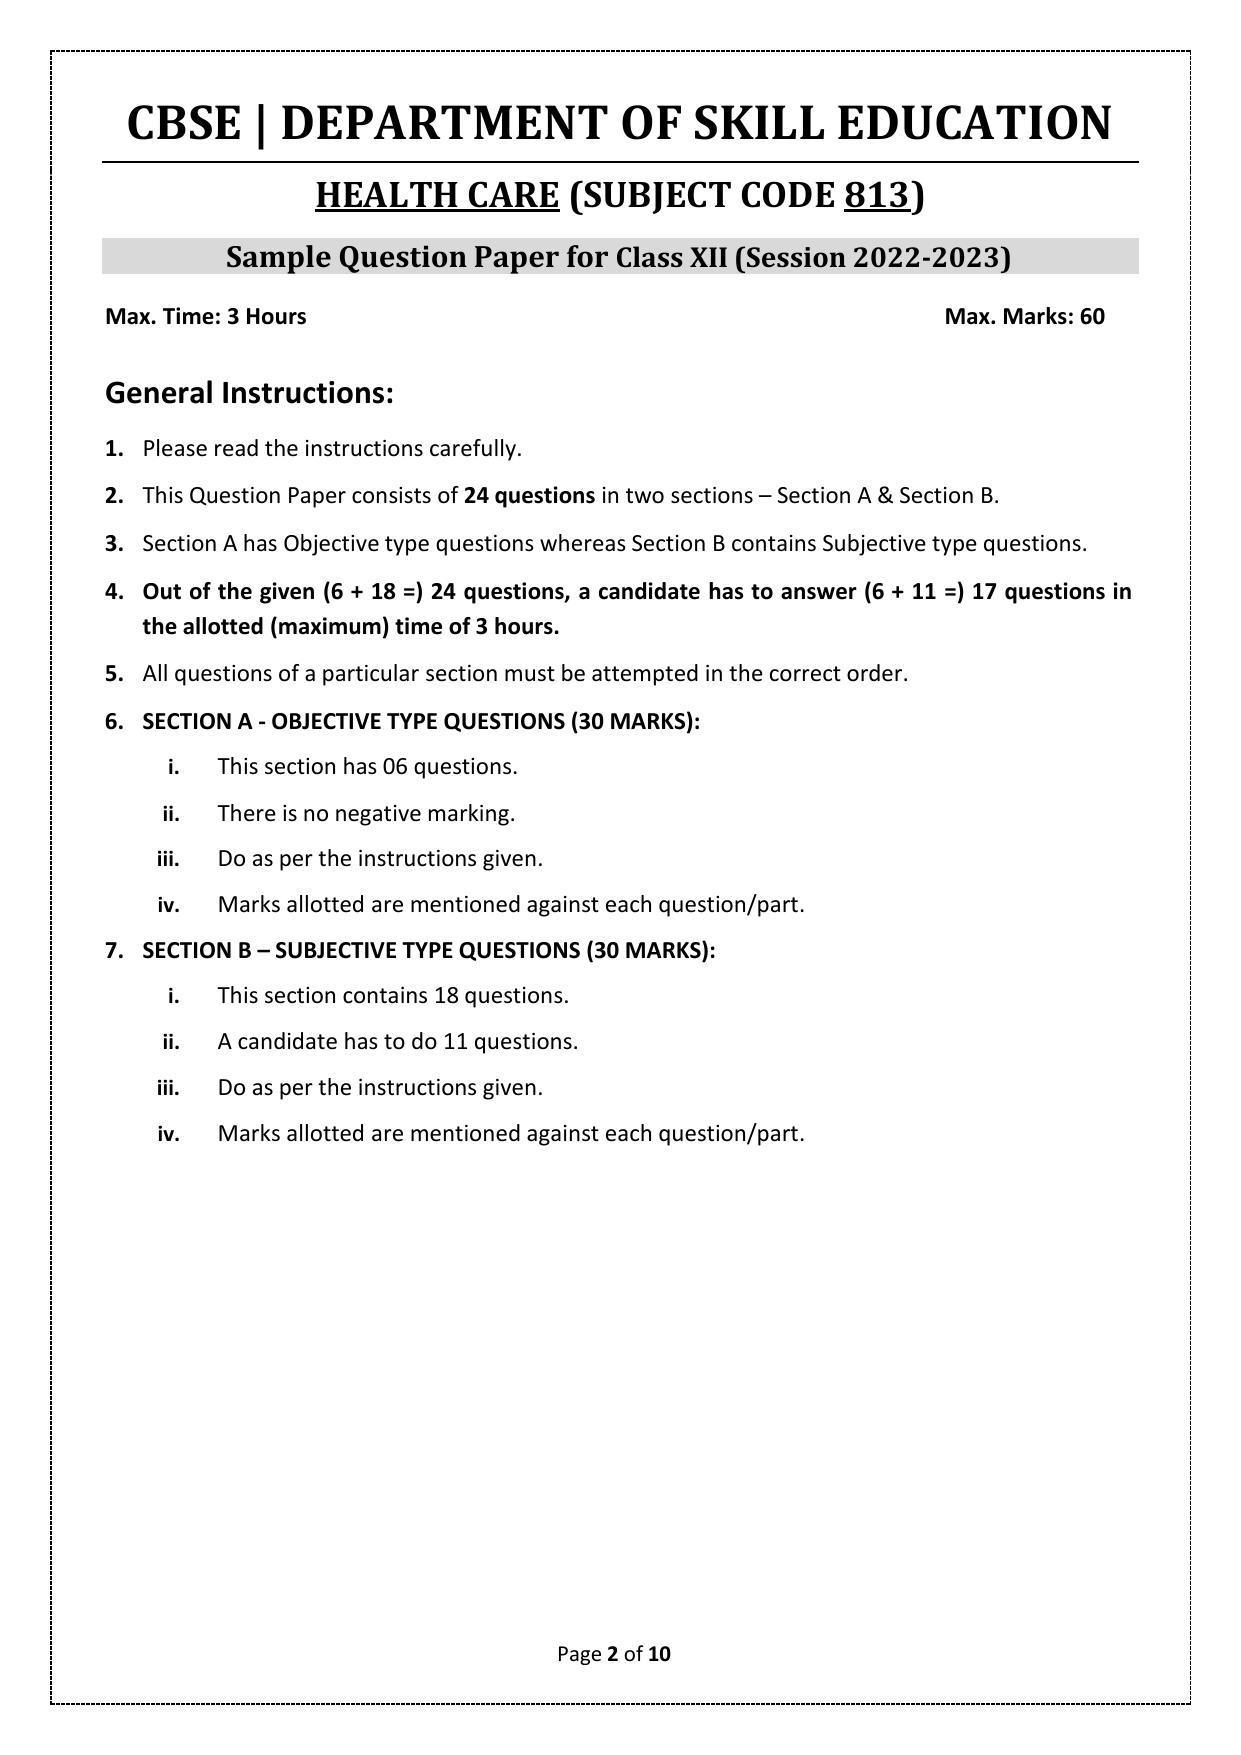 CBSE Class 12 Health Care (Skill Education) Sample Papers 2023 - Page 2